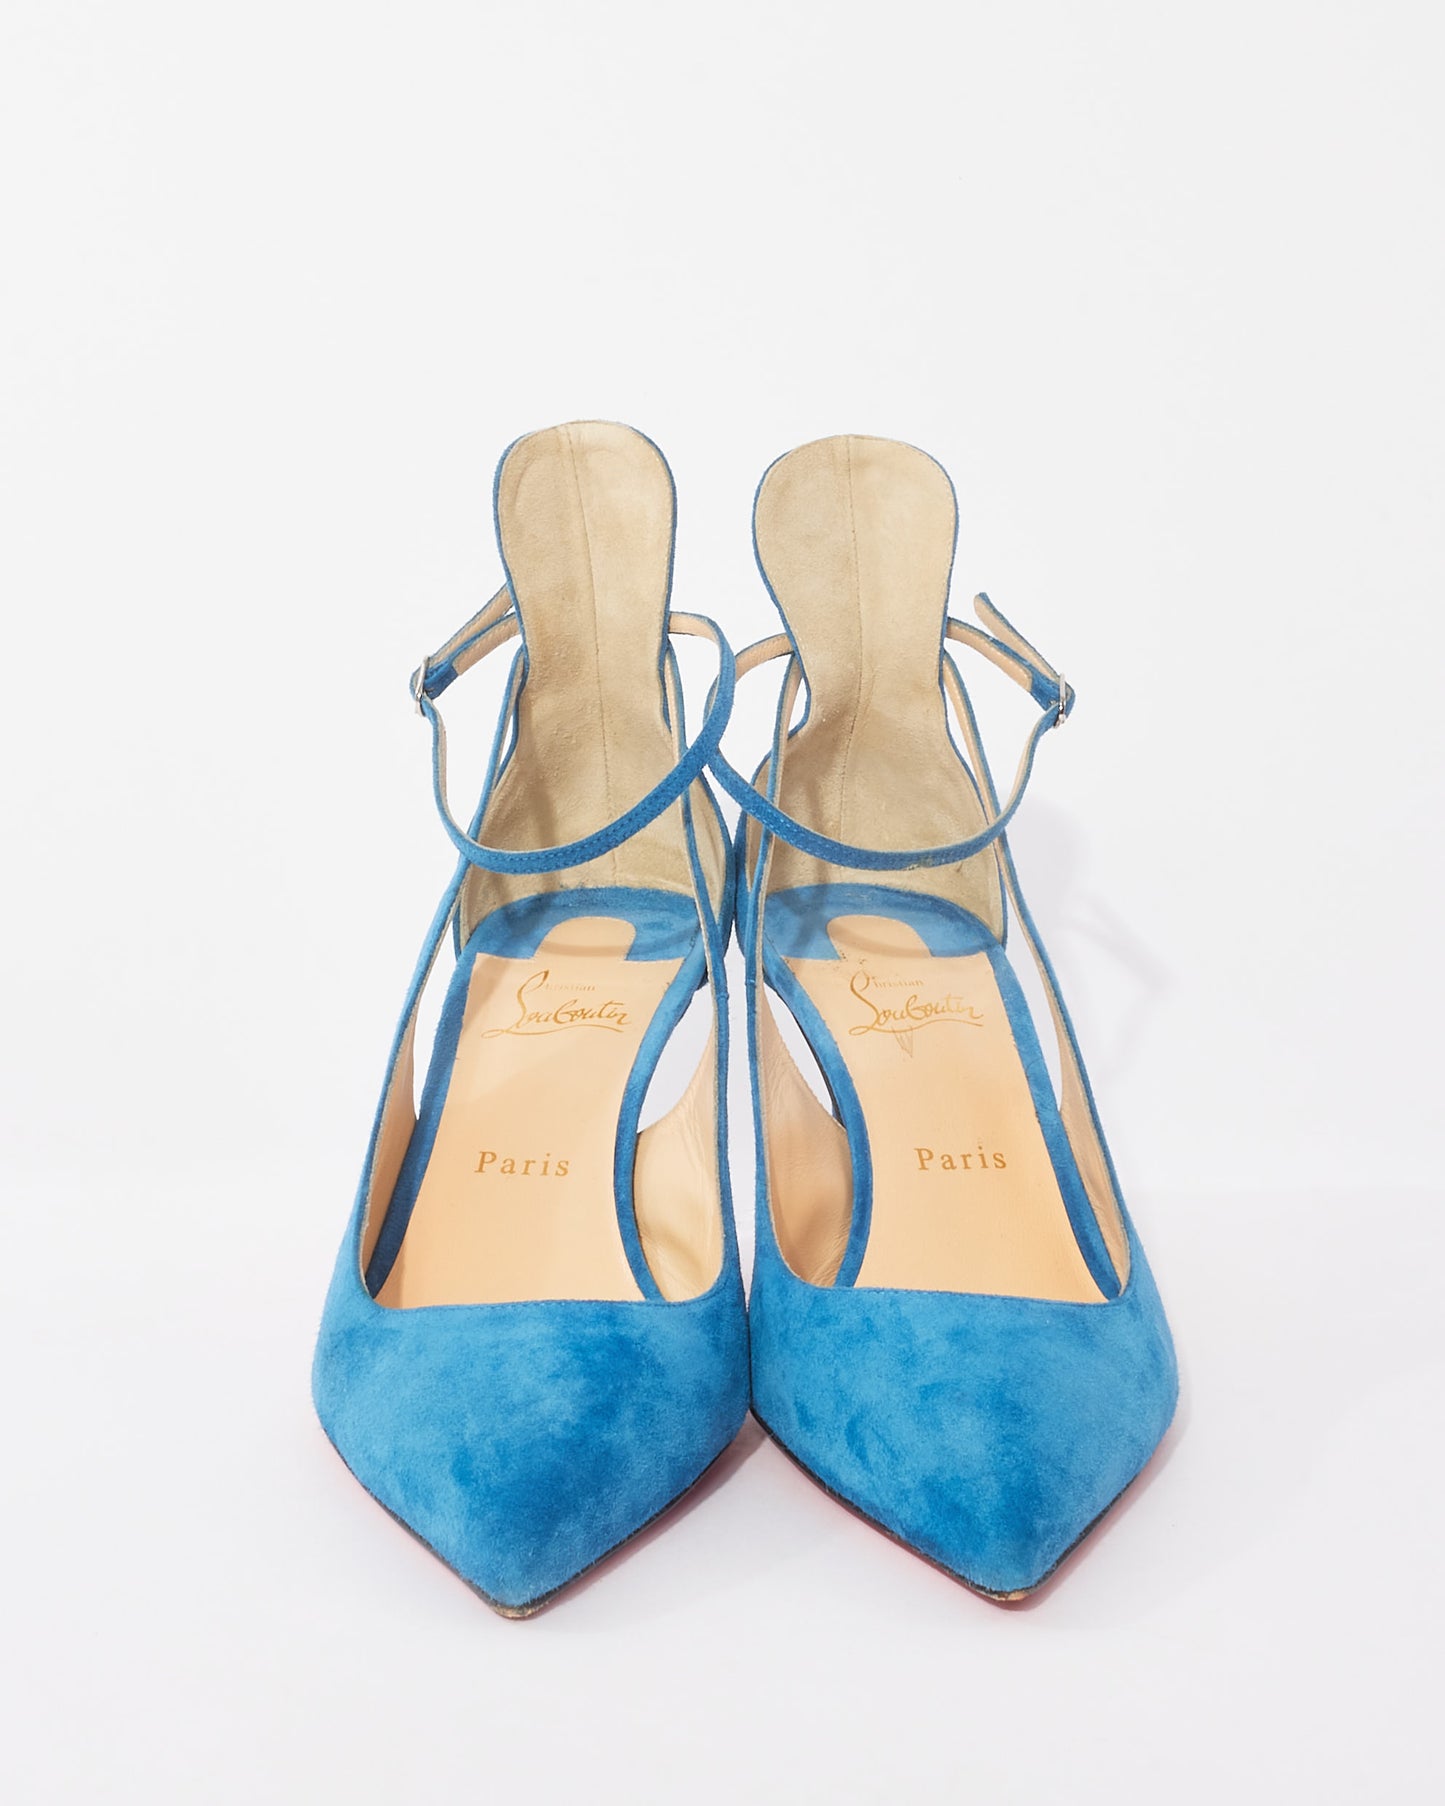 Christian Louboutin Turquoise Suede Strappy Pumps - 41